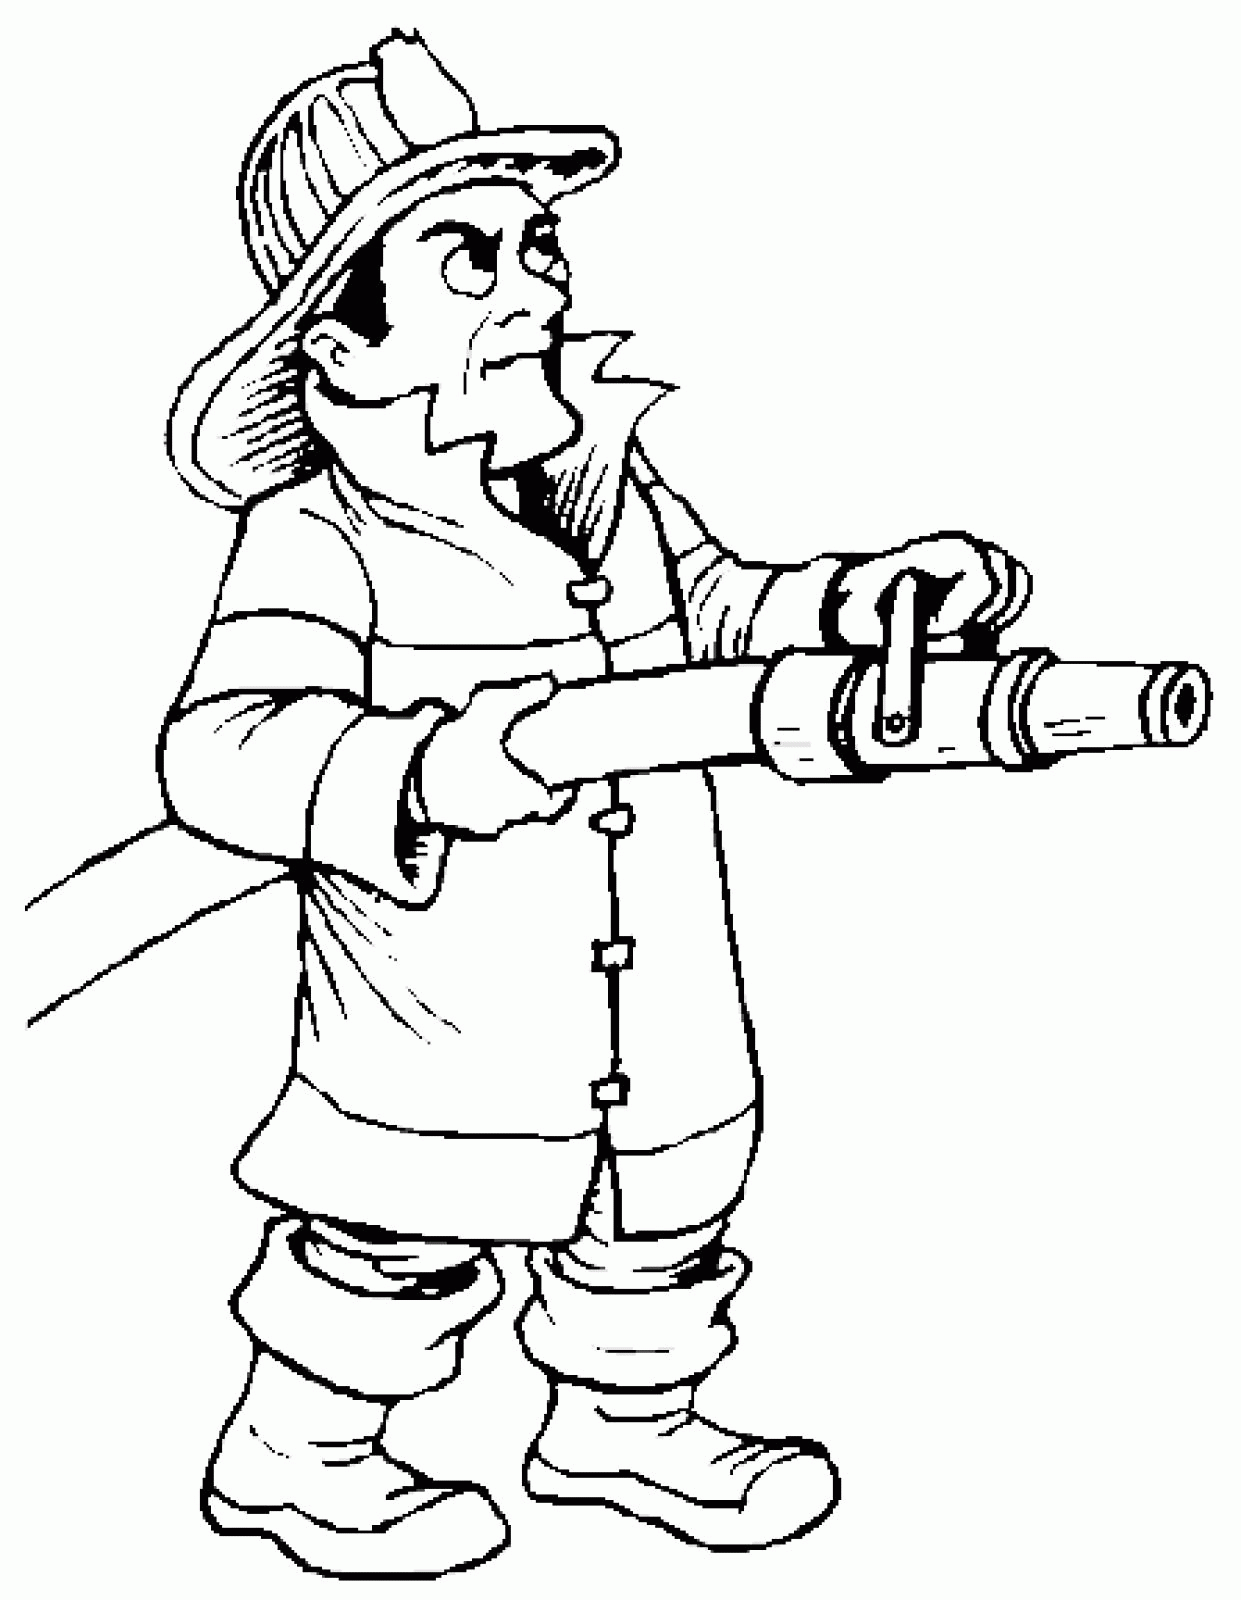 Fireman - Coloring Pages for Kids and for Adults